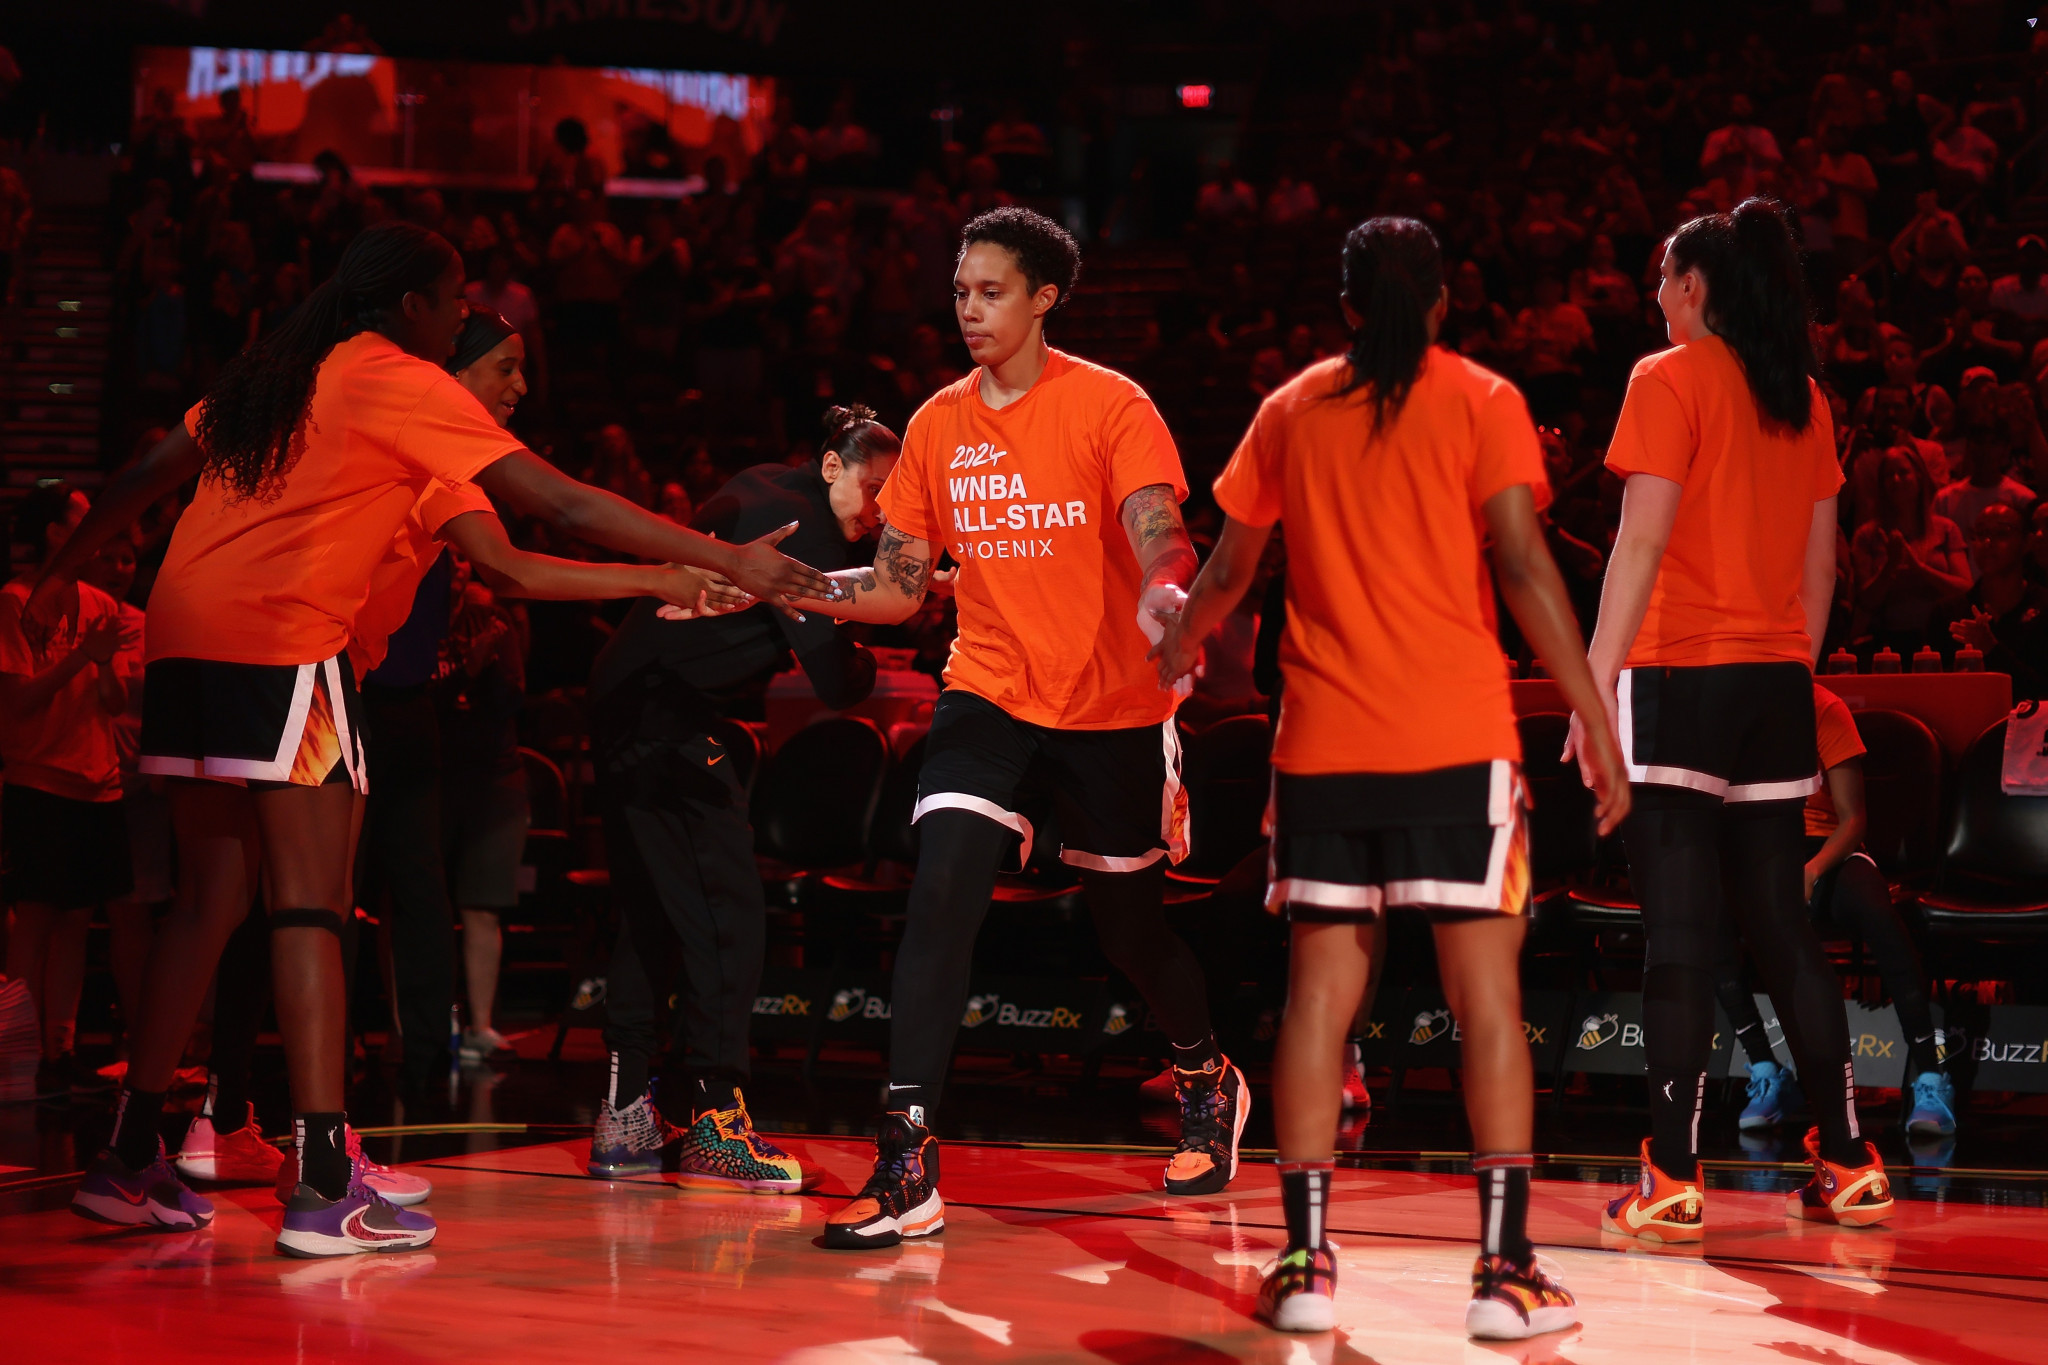 Griner's Phoenix to host WNBA All-Star Game before US team head to Paris 2024